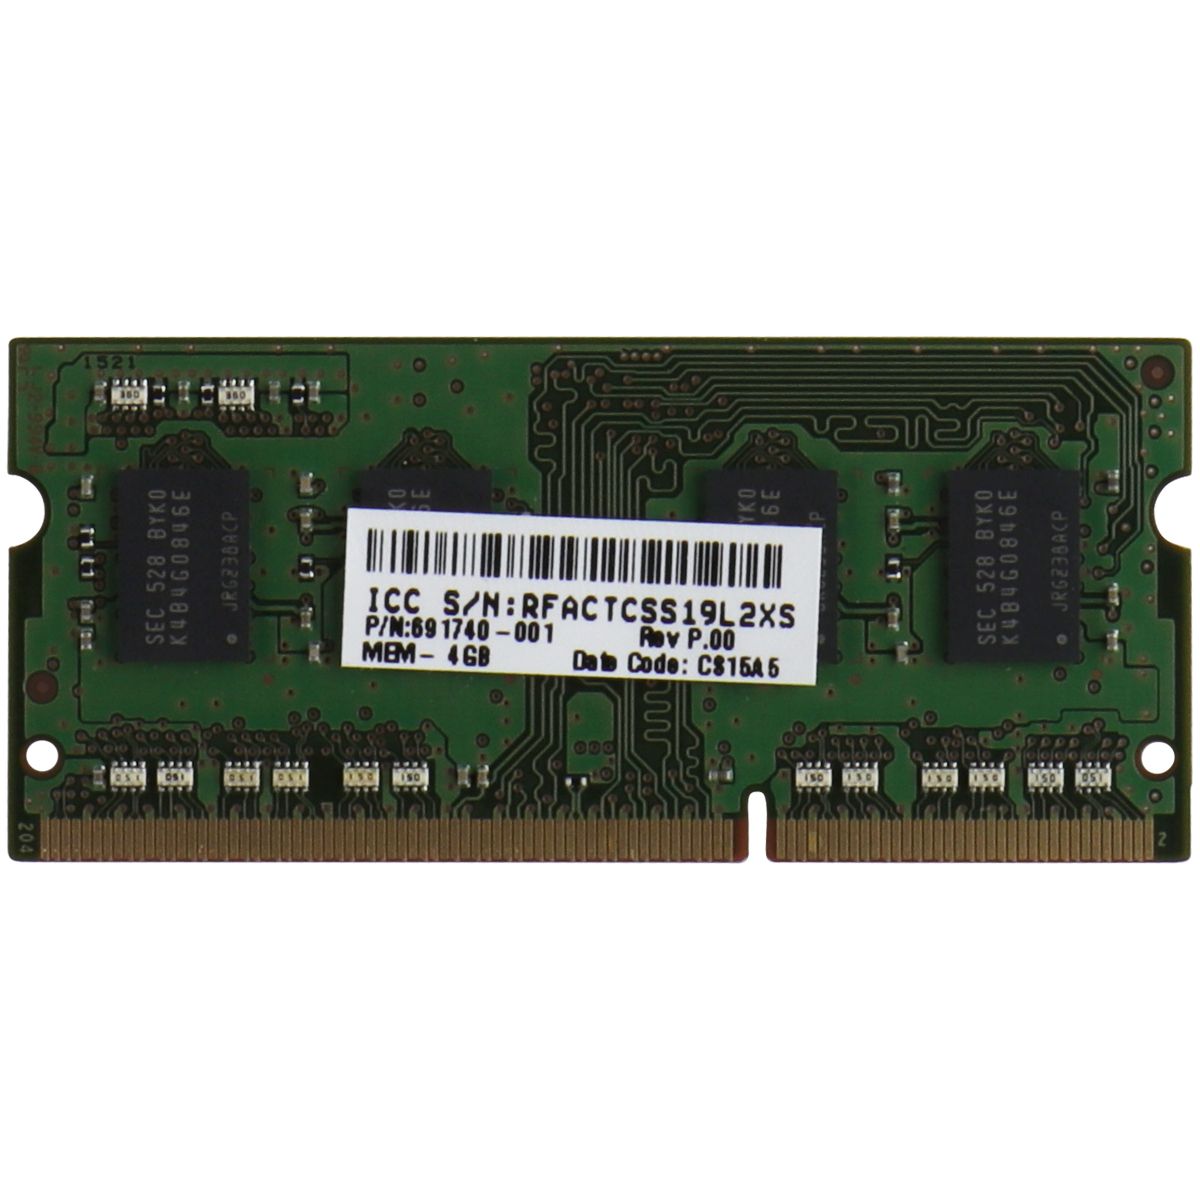 Samsung (4GB) DDR3 RAM PC3L-12800S (1Rx8) SO-DIMM 1600MHz (M471B5173EBO-YK0) Computer Parts - Memory (RAM) Samsung    - Simple Cell Bulk Wholesale Pricing - USA Seller